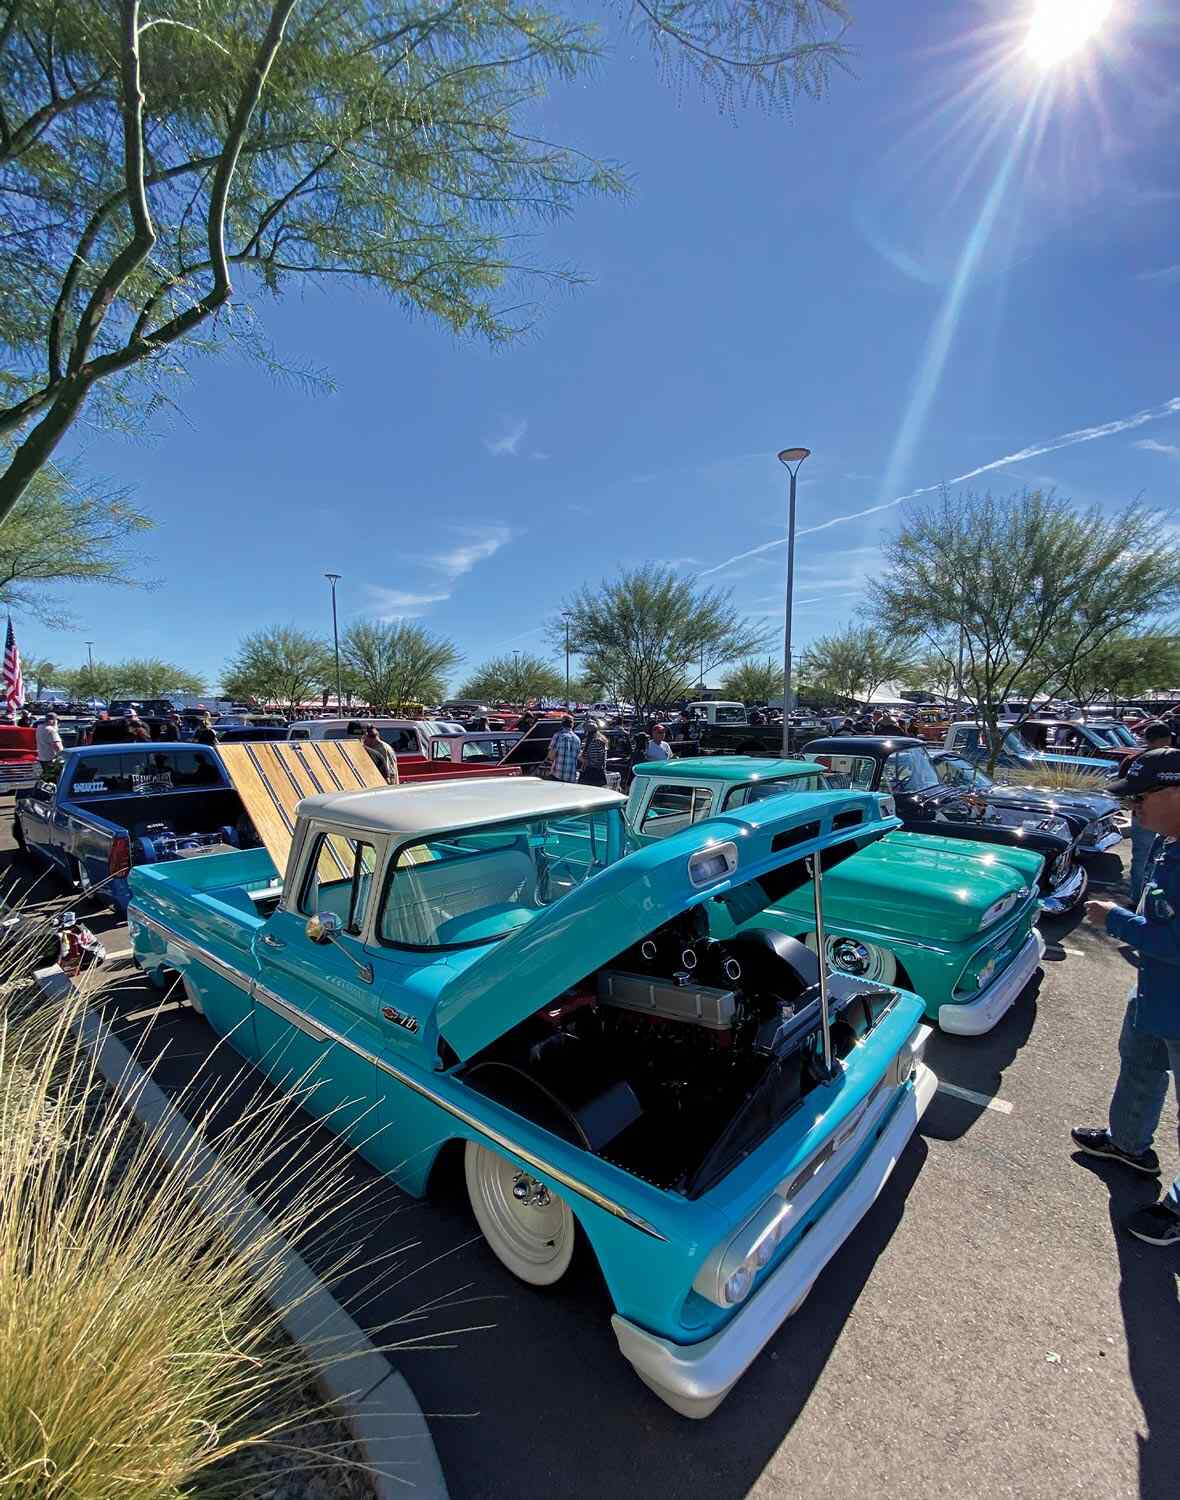 three quarter passenger side view of a turquoise classic chevy truck with its hood and truck bed raised